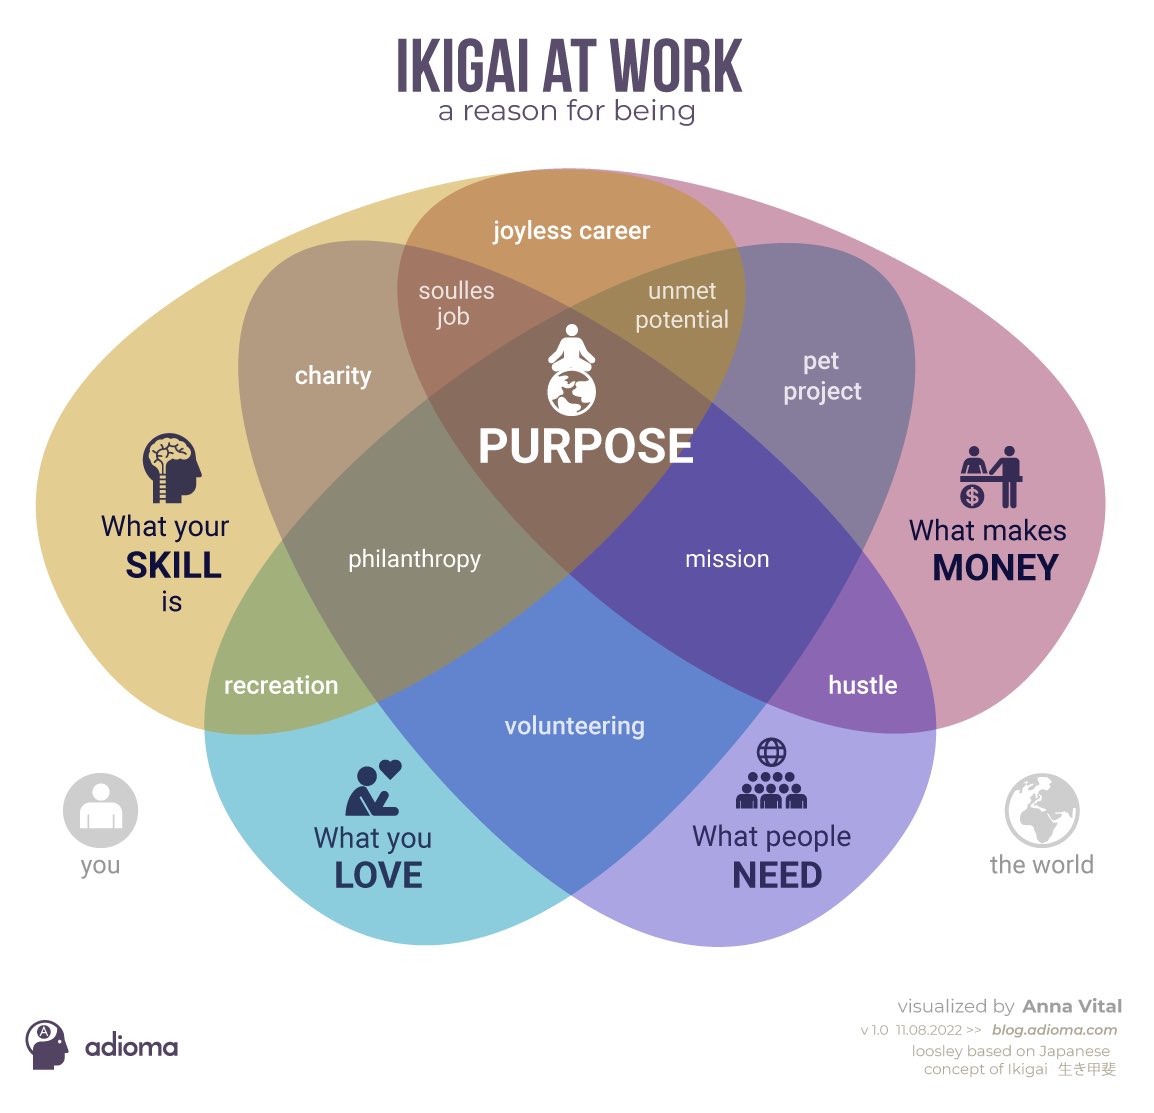 Tried to improve Ikigai (生き甲斐) diagram done by @mccandelish / @infobeautiful Perhaps a better approach would be to use a reasoning engine or a language model like GPT3. What do you think? blog.adioma.com/ikigai-reason-…